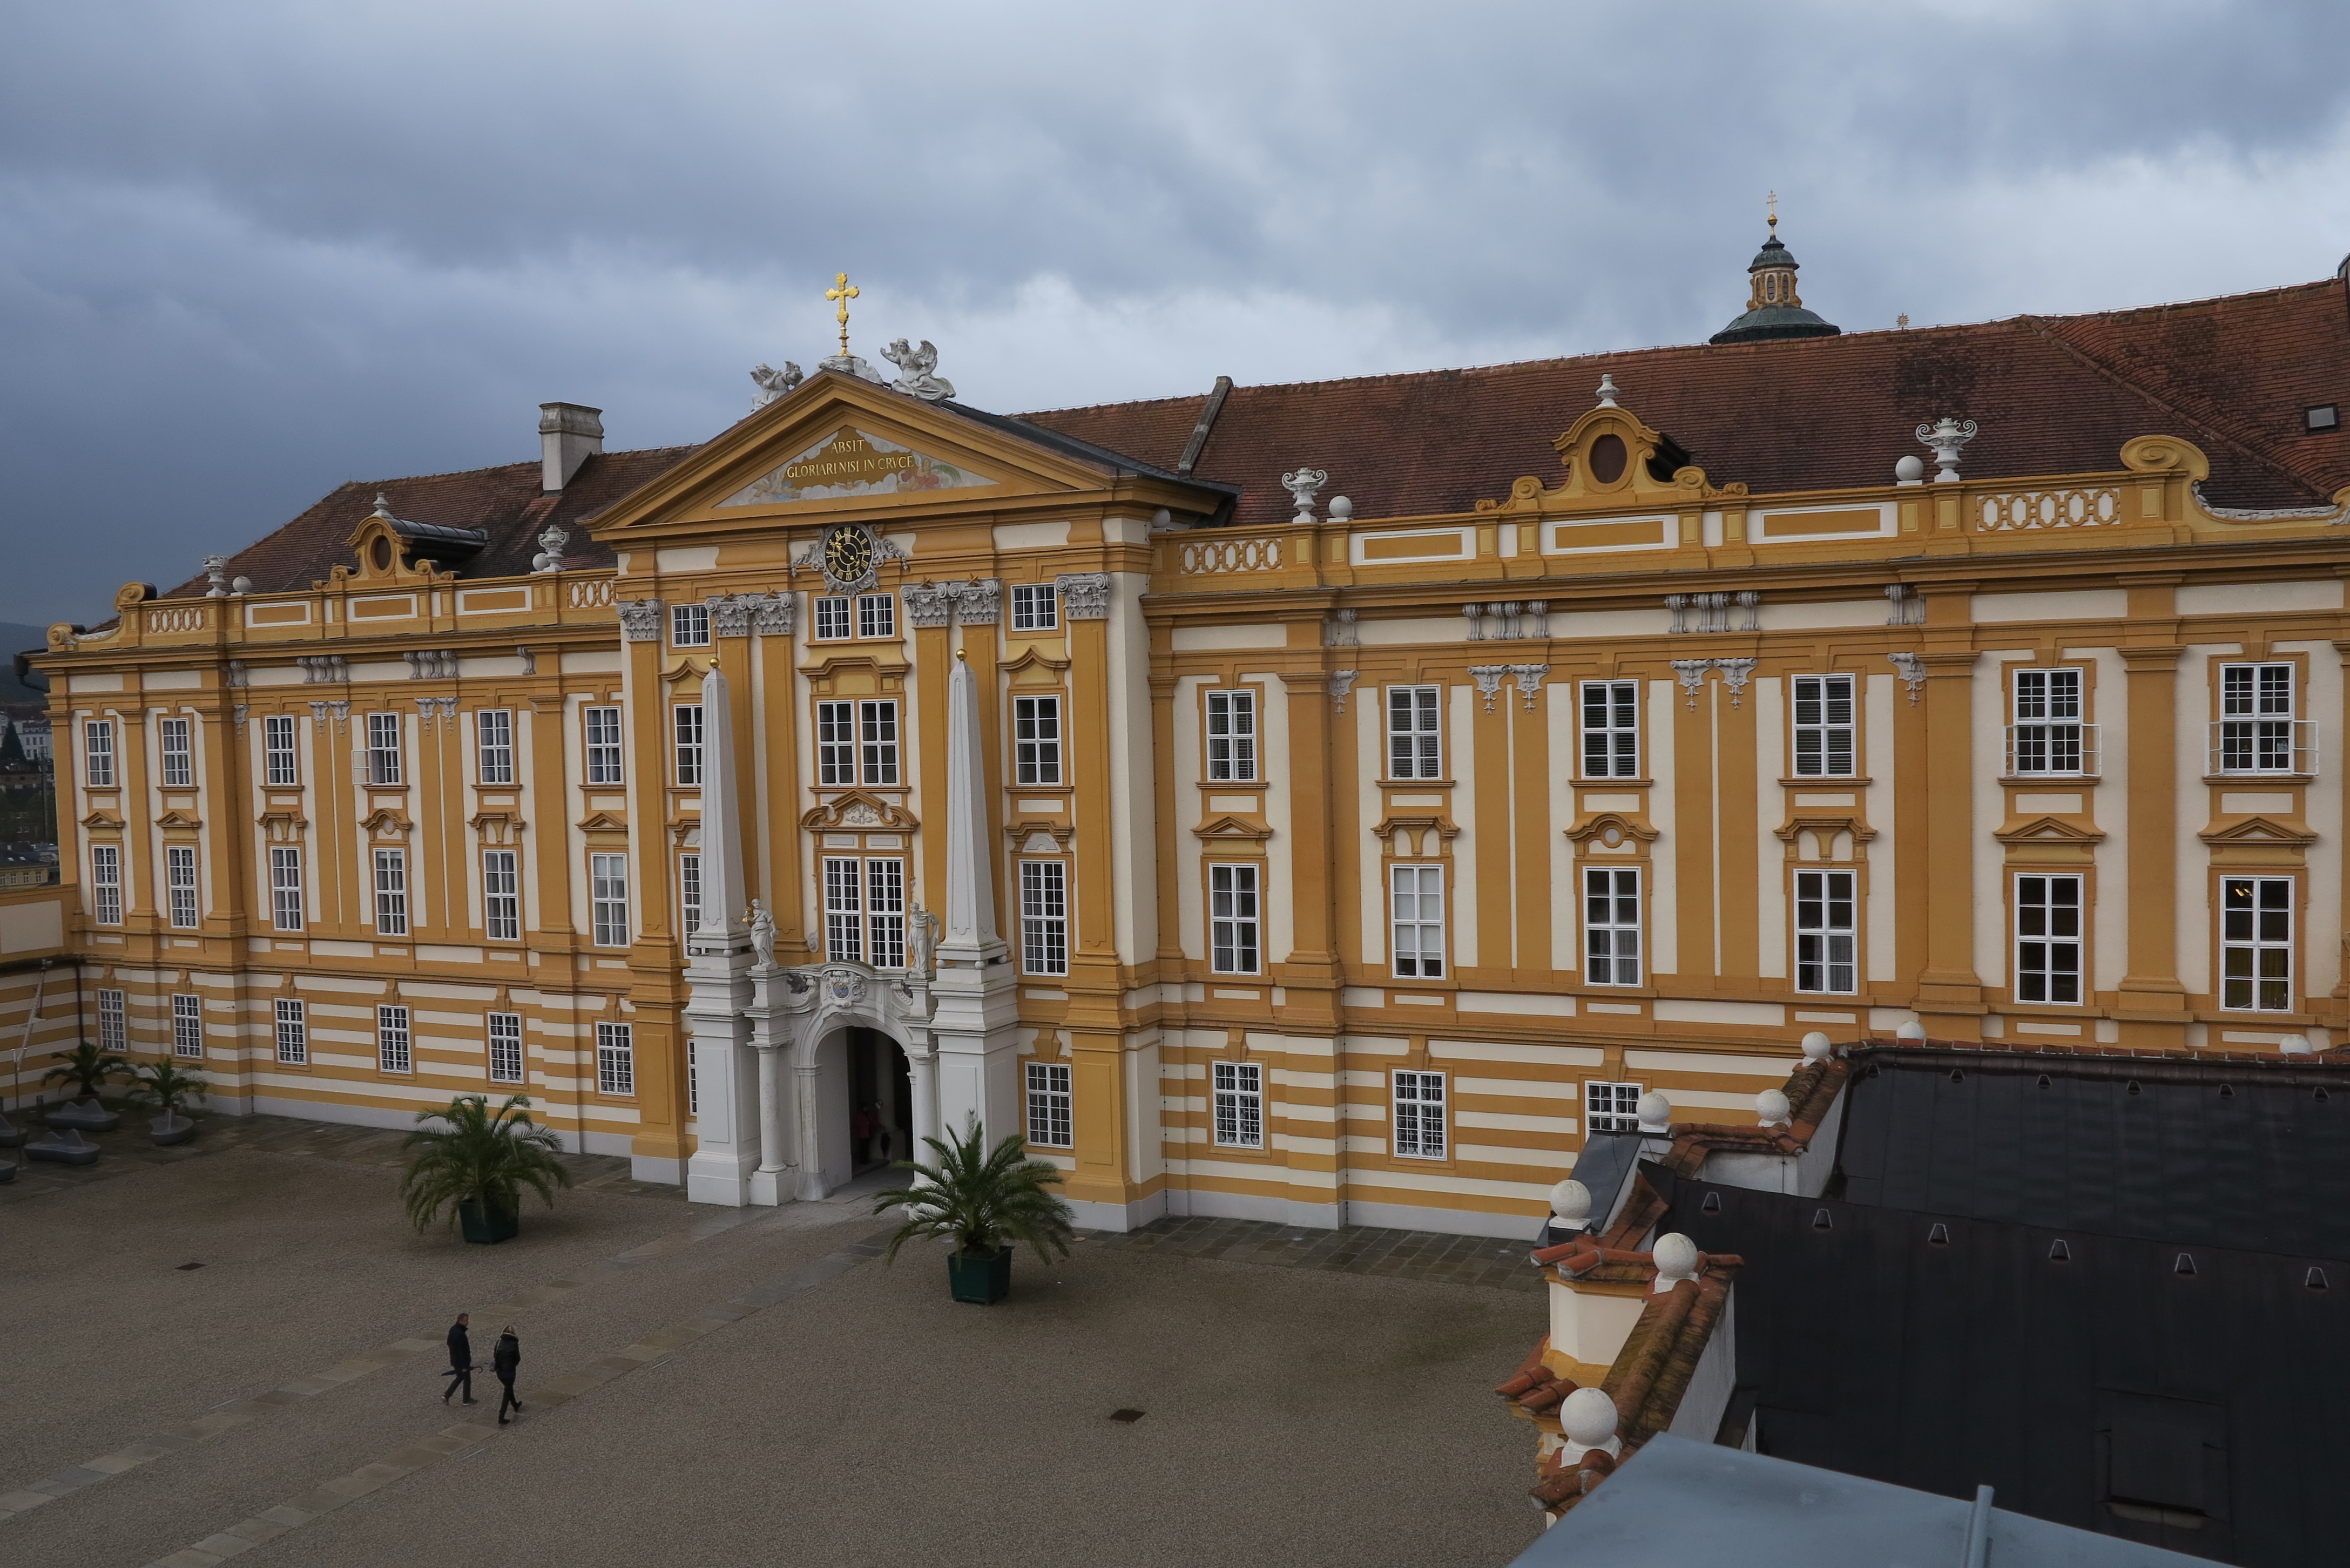 Melk of human kindness: The abbey is still a working monastery